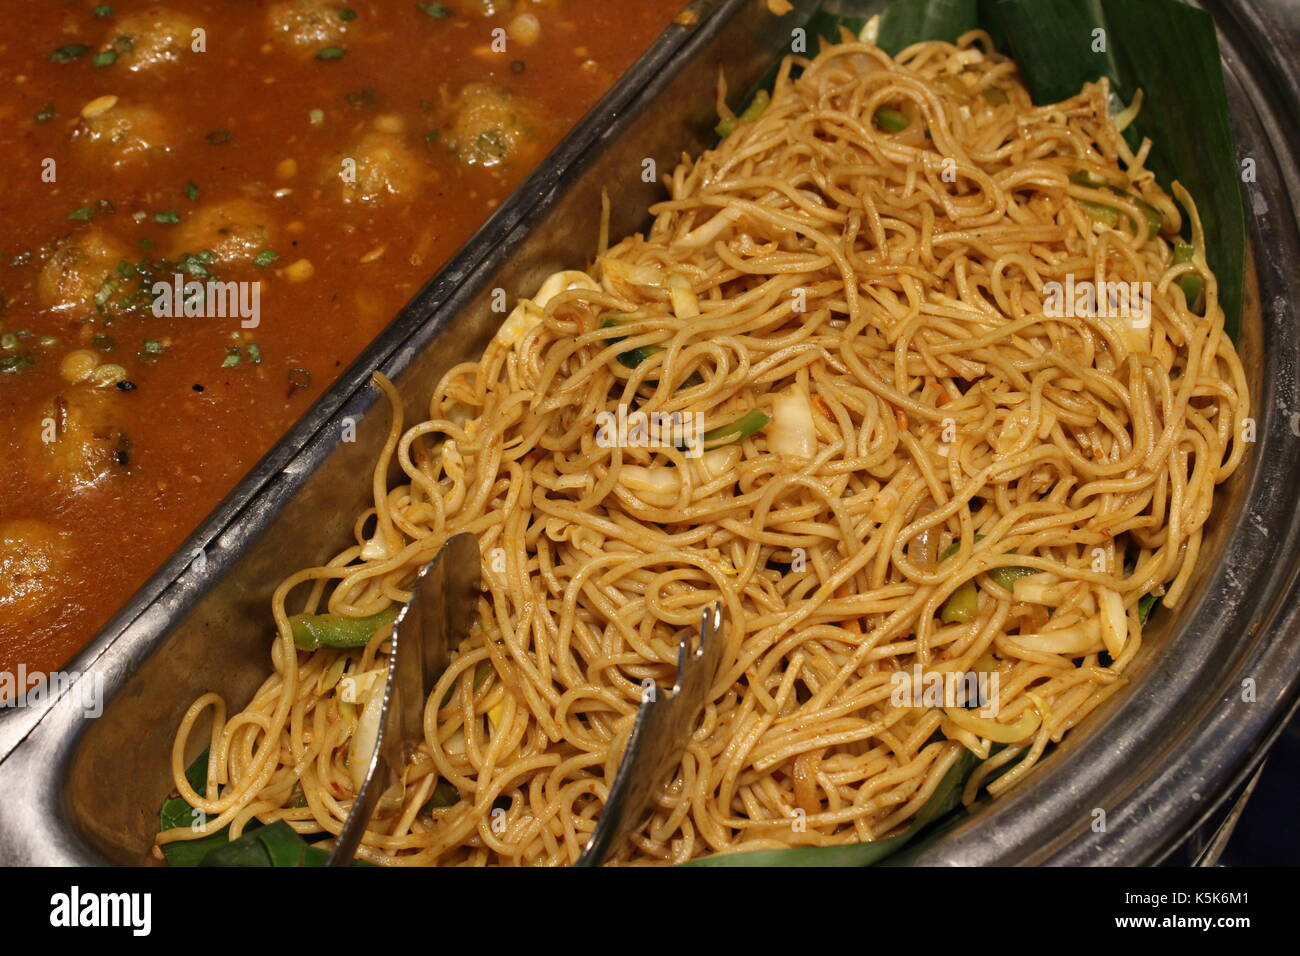 Veg ball in hot garlic sauce and veg noodles served as a part of the main course of a buffet at a restaurant Stock Photo